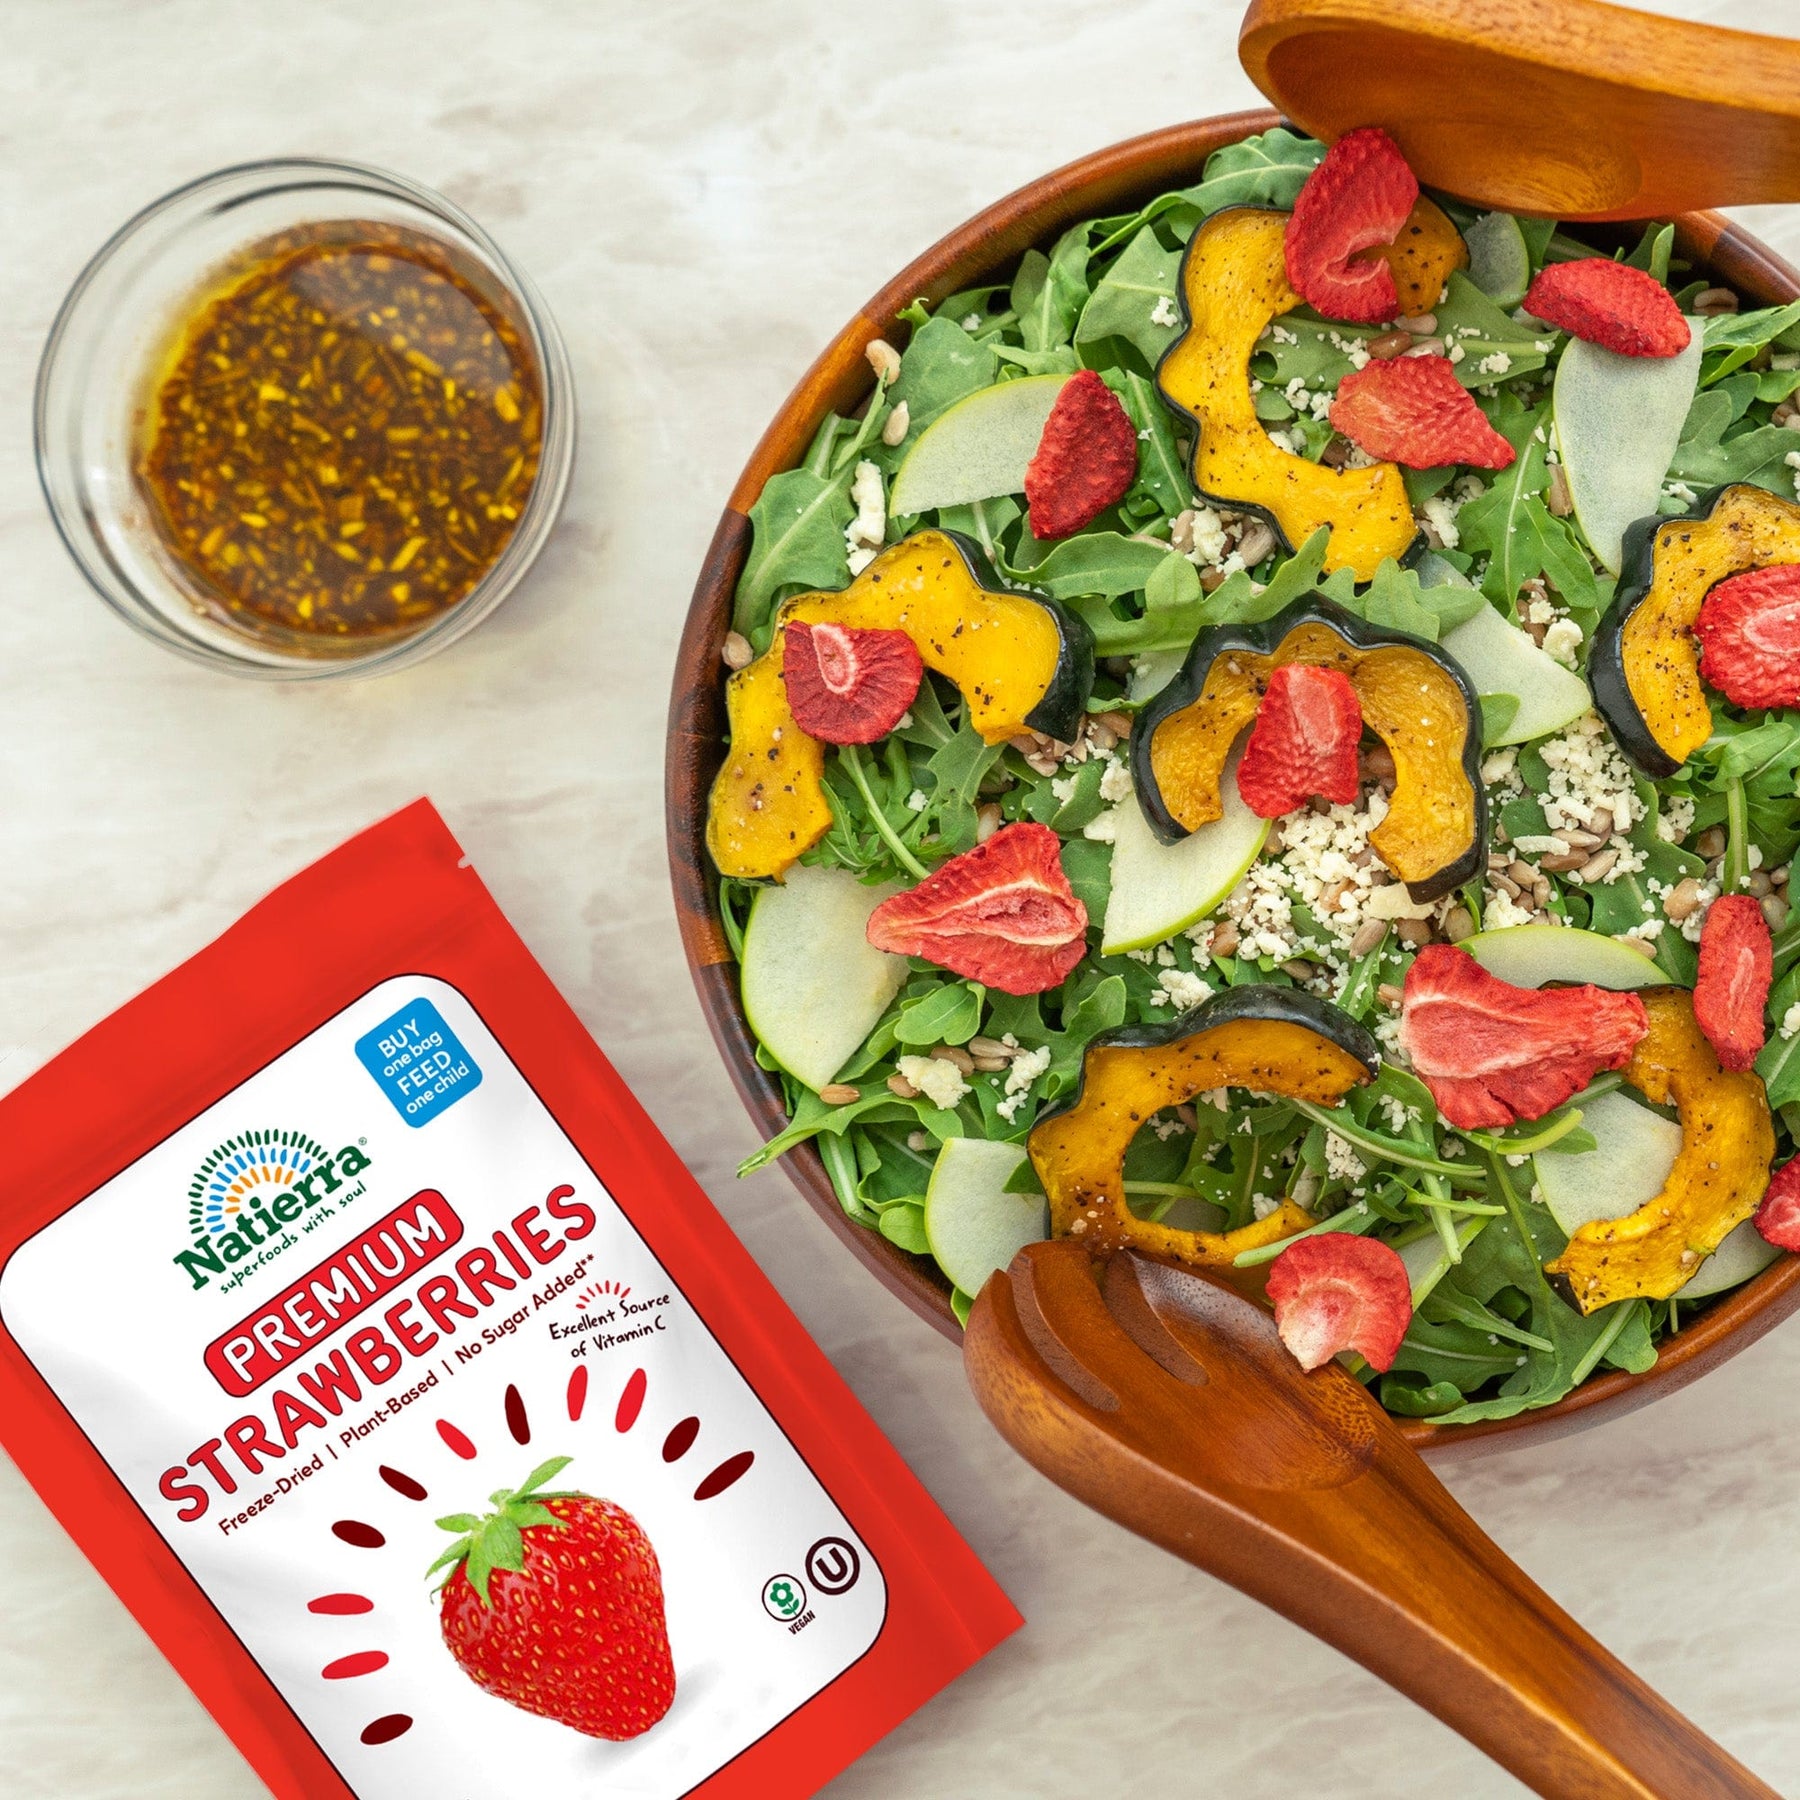 An Autumn salad made with Natierra Freeze-Dried Strawberries